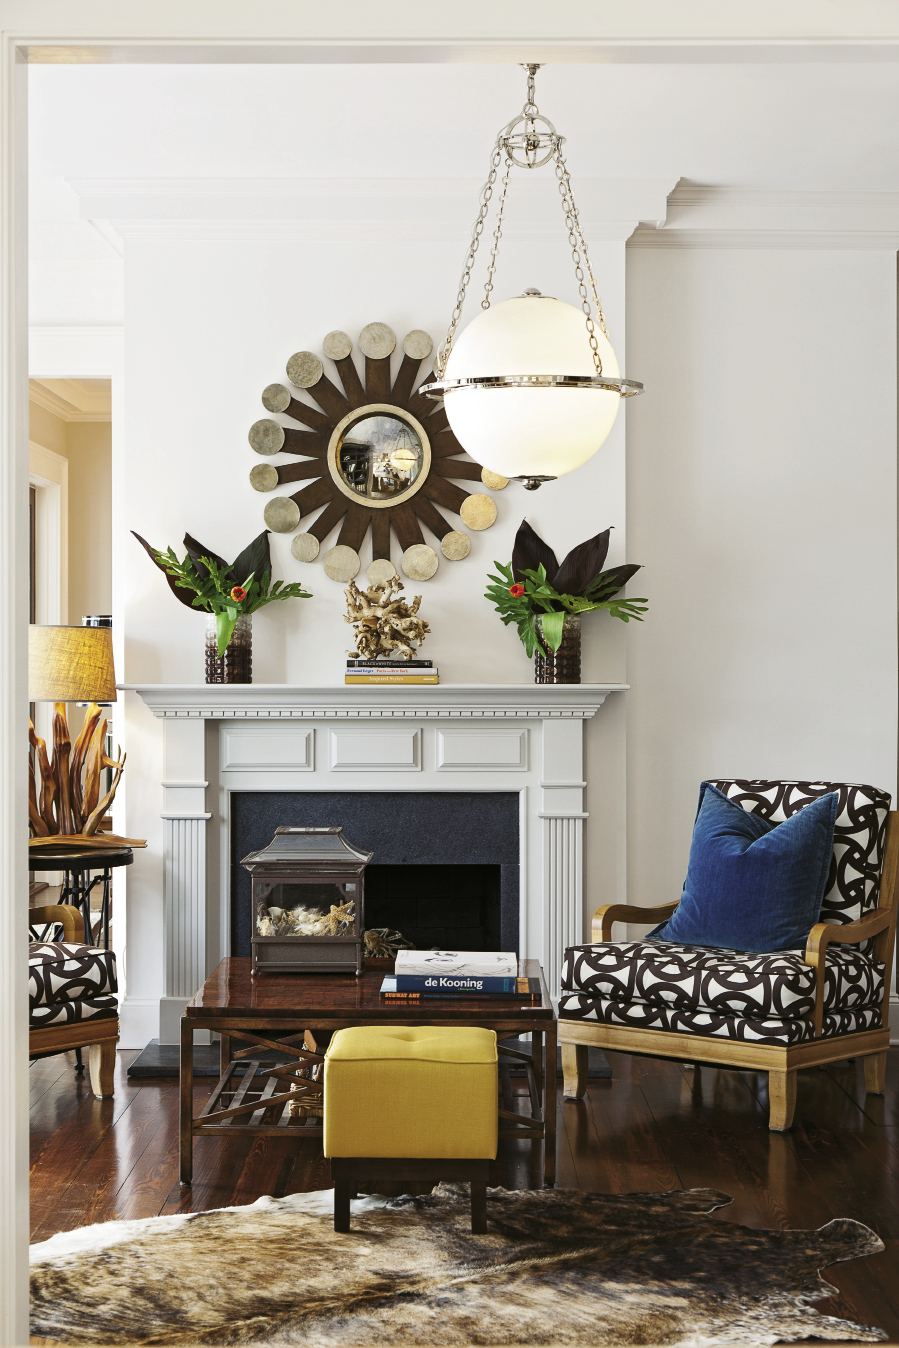 A study in contrasts: Jennifer believes a well- accessorized room begins with juxtaposition.